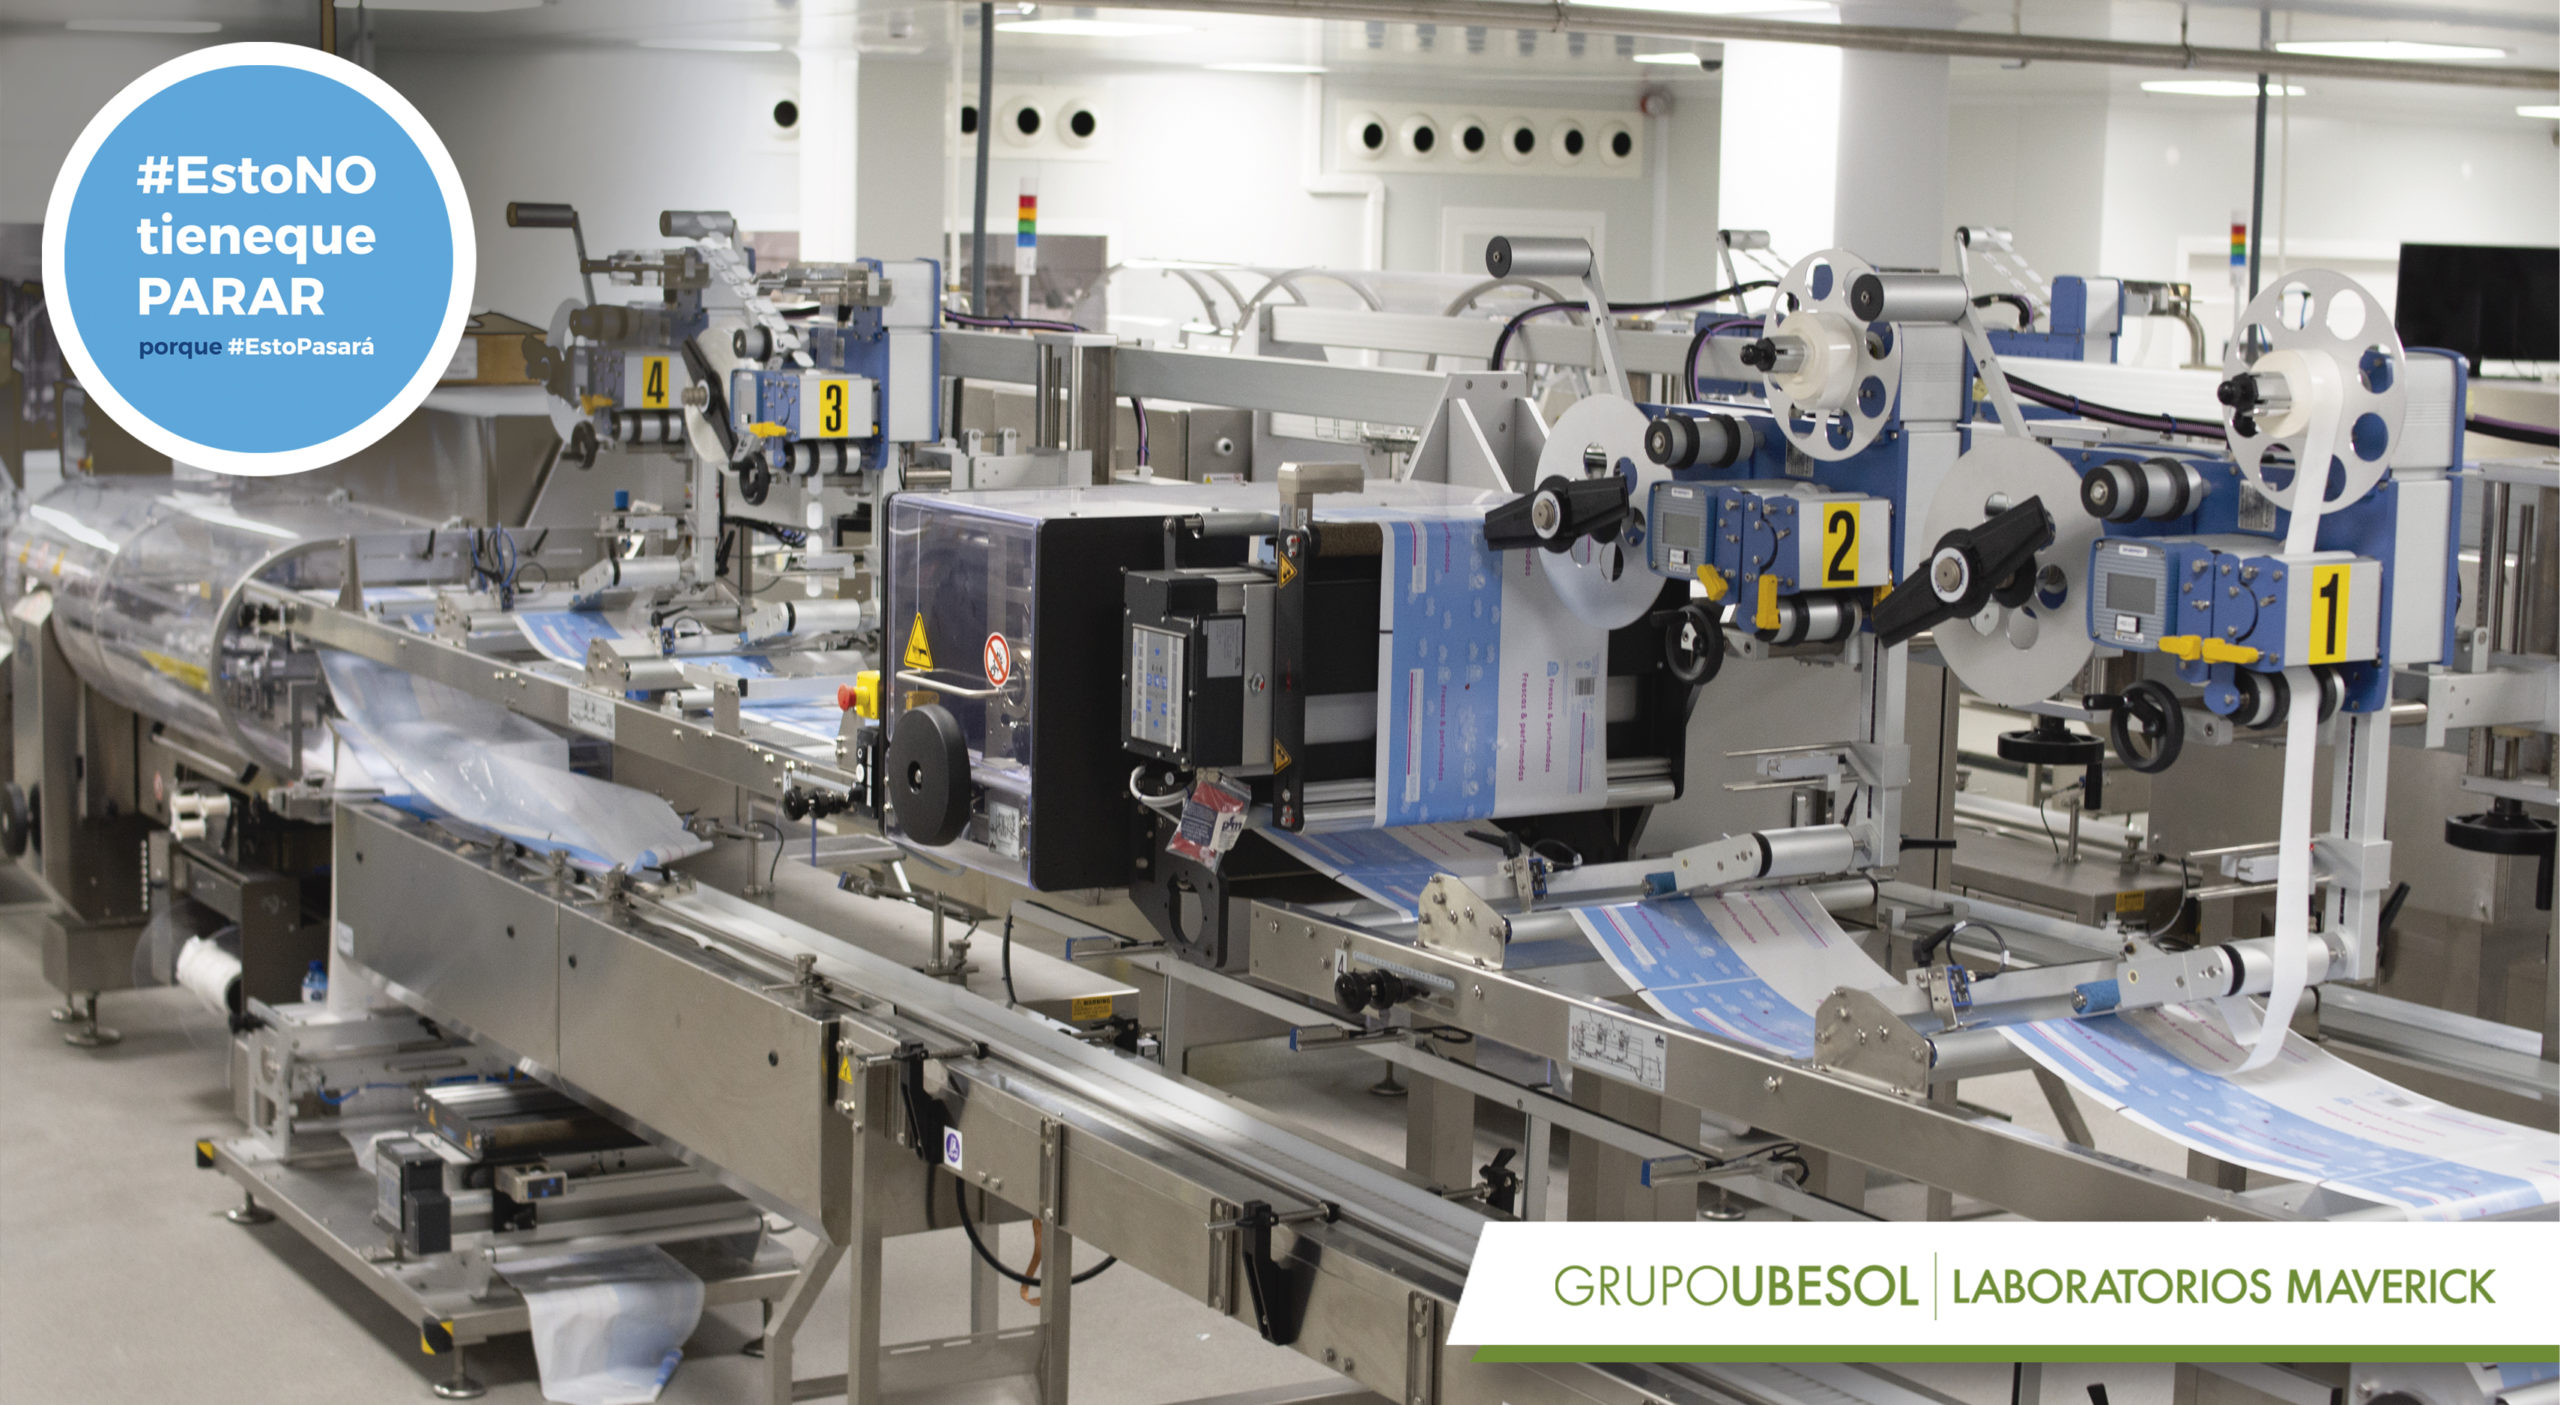 Grupo Ubesol has transformed by intensifying its production rate to be able to meet the market demands during the covid-19 crisis.